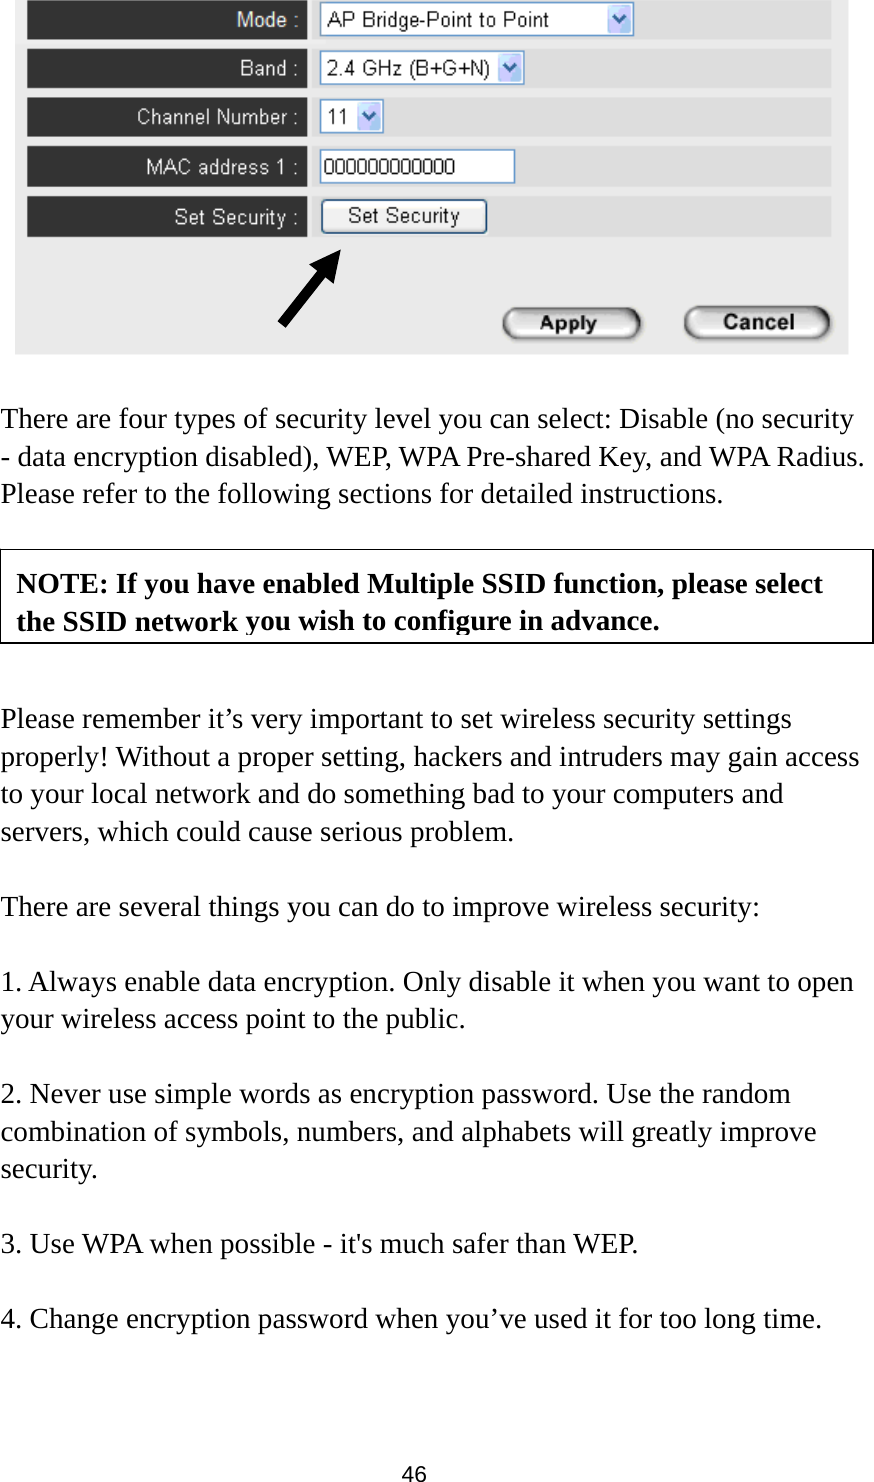  46     There are four types of security level you can select: Disable (no security - data encryption disabled), WEP, WPA Pre-shared Key, and WPA Radius. Please refer to the following sections for detailed instructions.      Please remember it’s very important to set wireless security settings properly! Without a proper setting, hackers and intruders may gain access to your local network and do something bad to your computers and servers, which could cause serious problem.    There are several things you can do to improve wireless security:  1. Always enable data encryption. Only disable it when you want to open your wireless access point to the public.  2. Never use simple words as encryption password. Use the random combination of symbols, numbers, and alphabets will greatly improve security.  3. Use WPA when possible - it&apos;s much safer than WEP.  4. Change encryption password when you’ve used it for too long time. NOTE: If you have enabled Multiple SSID function, please select the SSID network you wish to configure in advance.